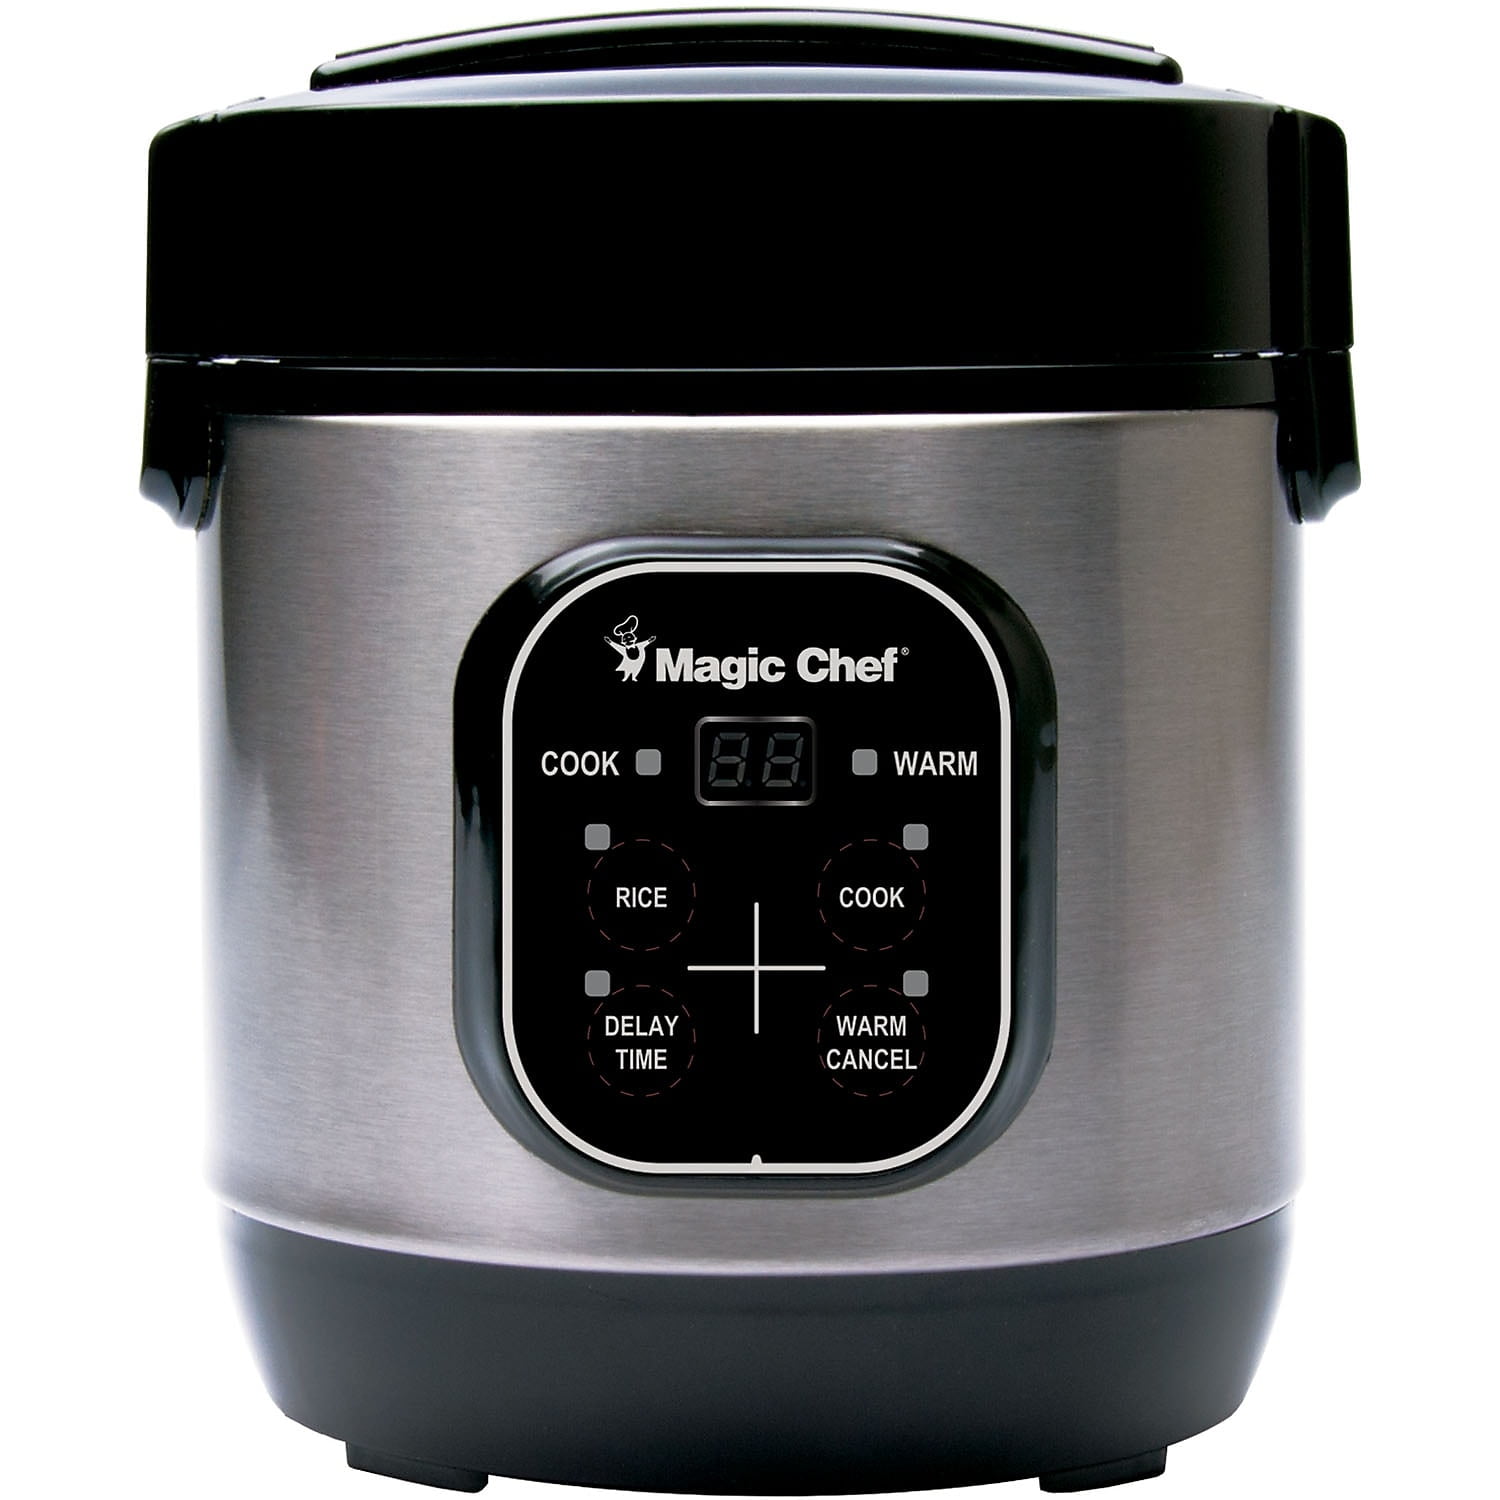 Better Chef 8 Cup Automatic Rice Cooker in Black With Rice Paddle and  Measuring Cup